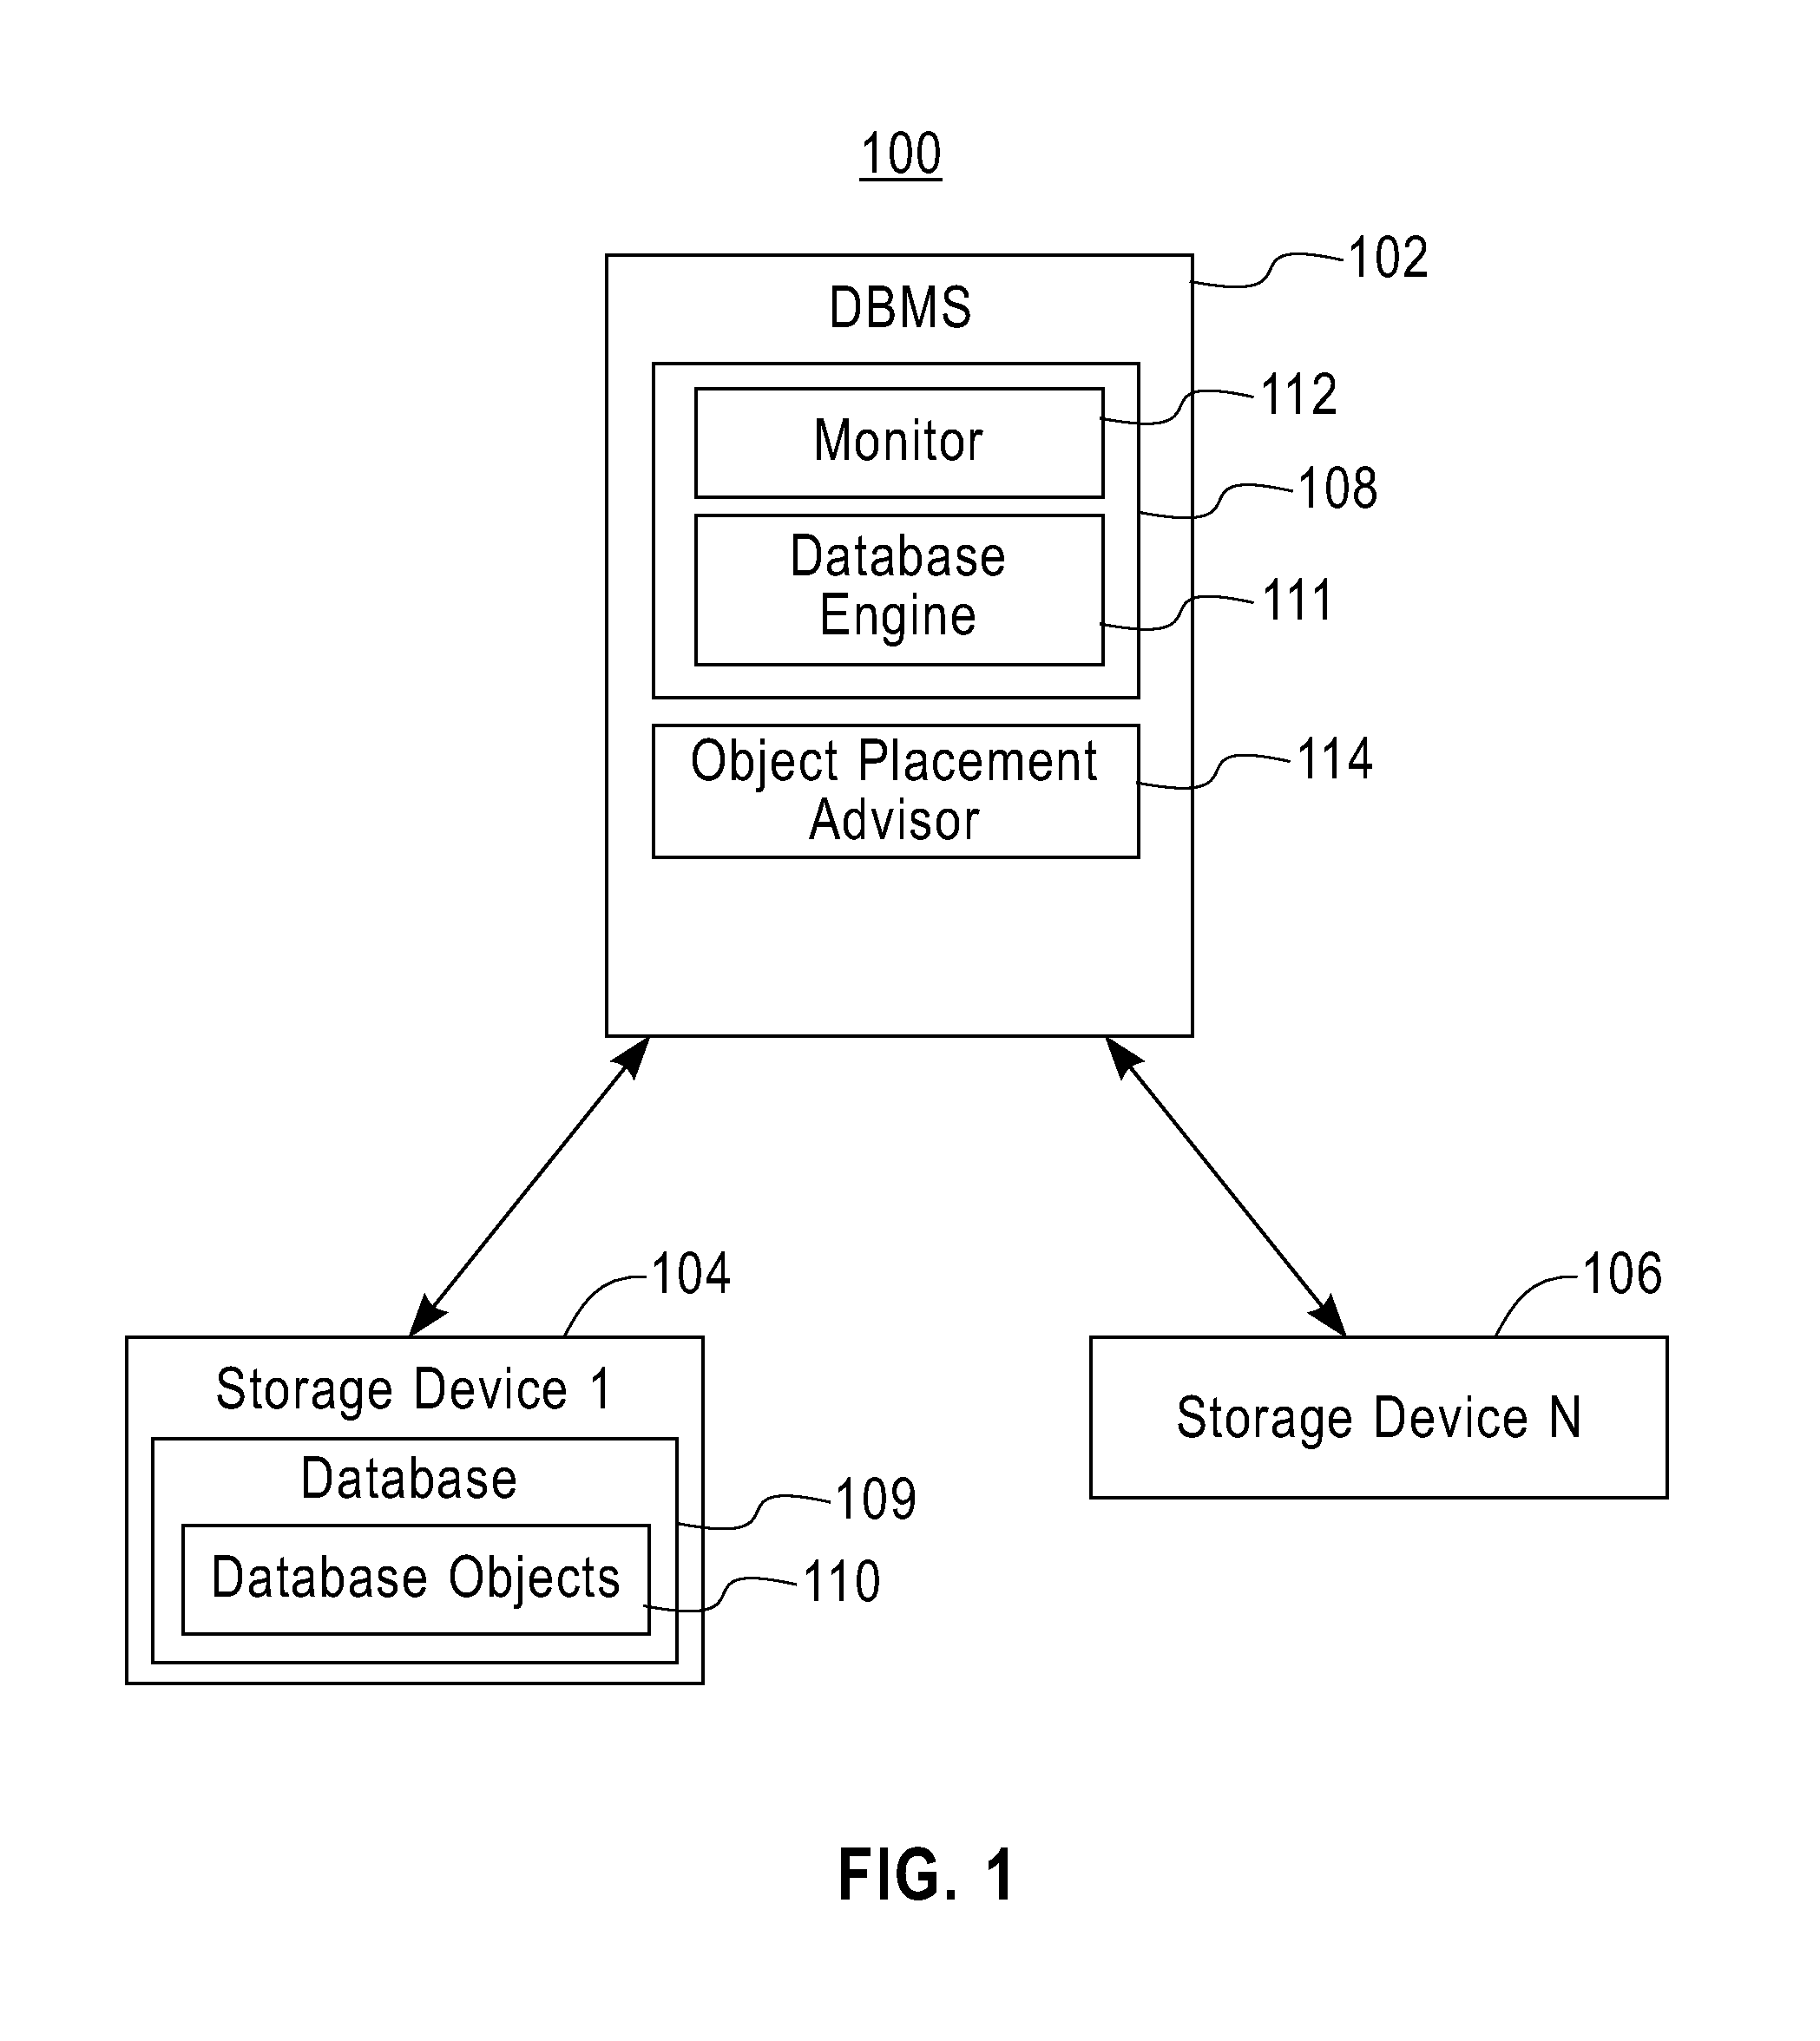 Managing database object placement on multiple storage devices